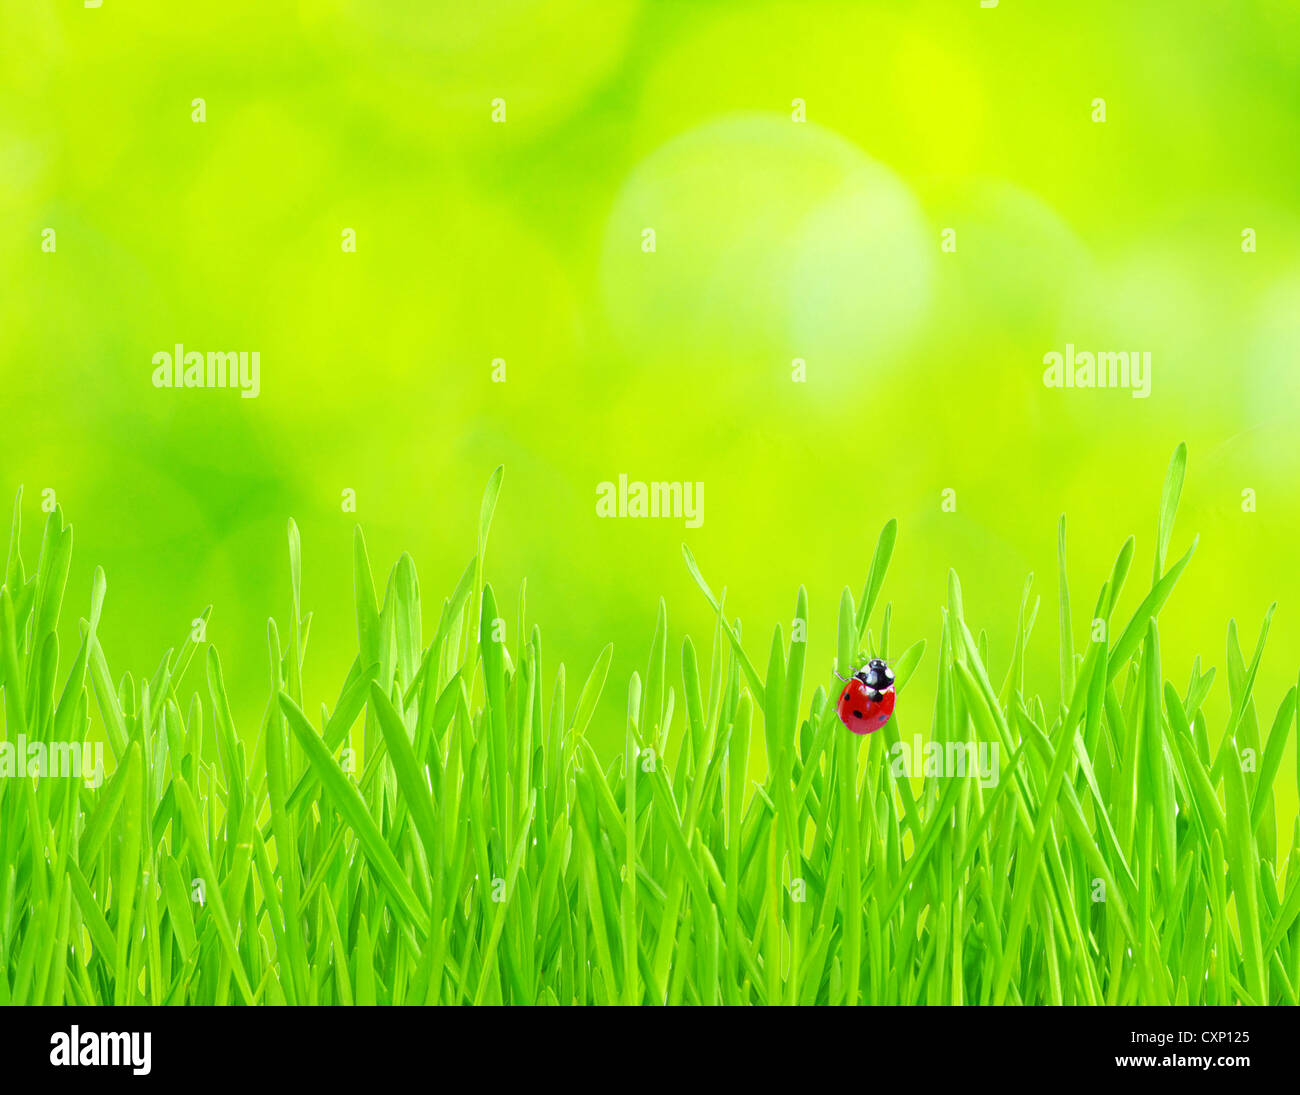 red ladybug on green grass isolated on green Stock Photo